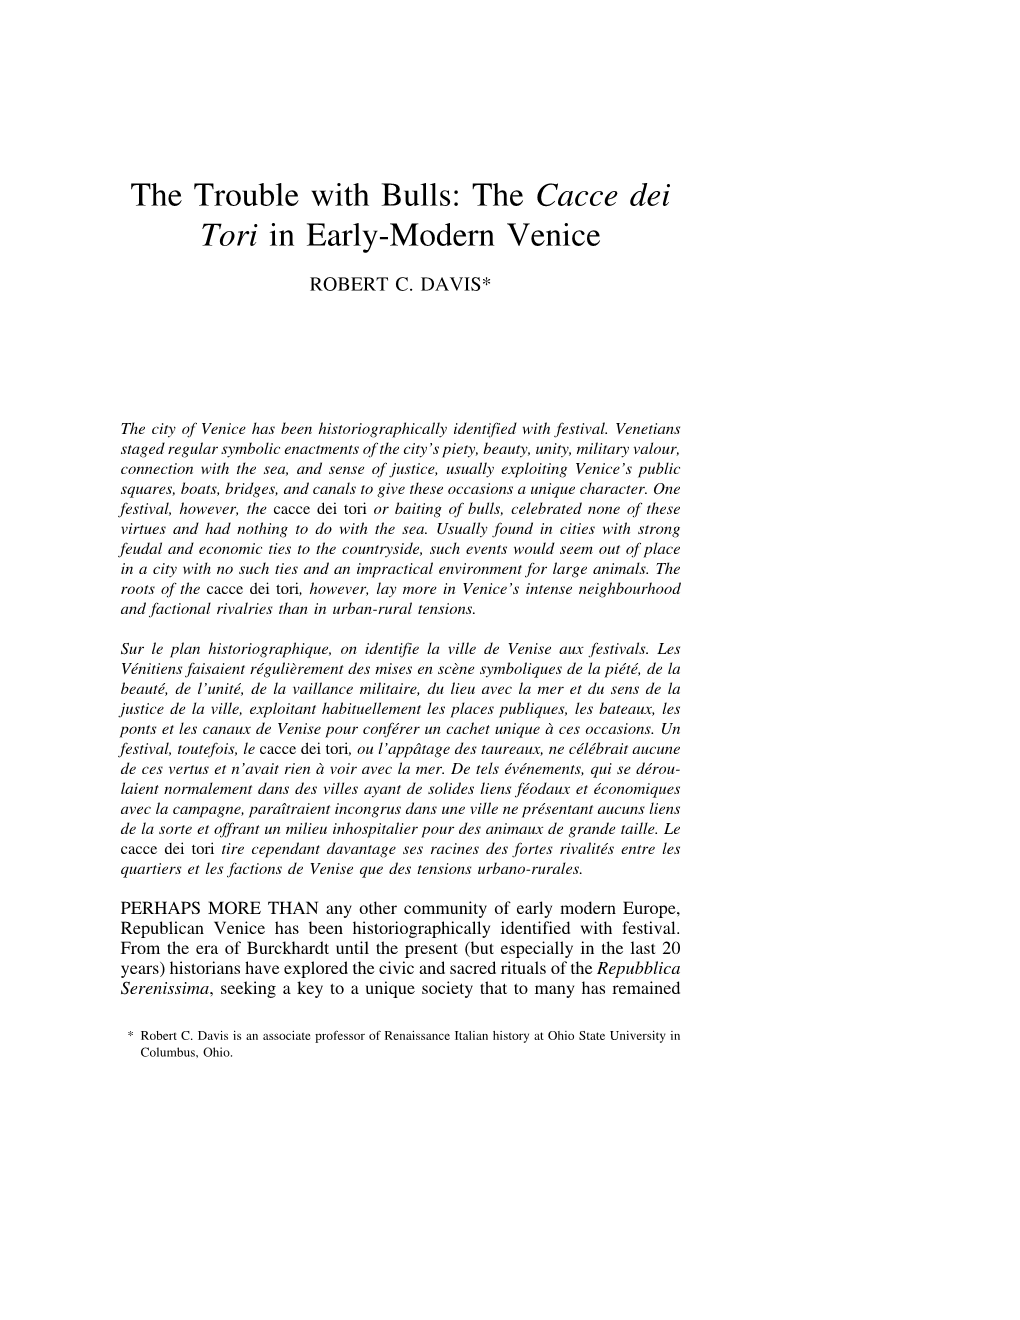 The Trouble with Bulls: the Cacce Dei Tori in Early4modern Venice